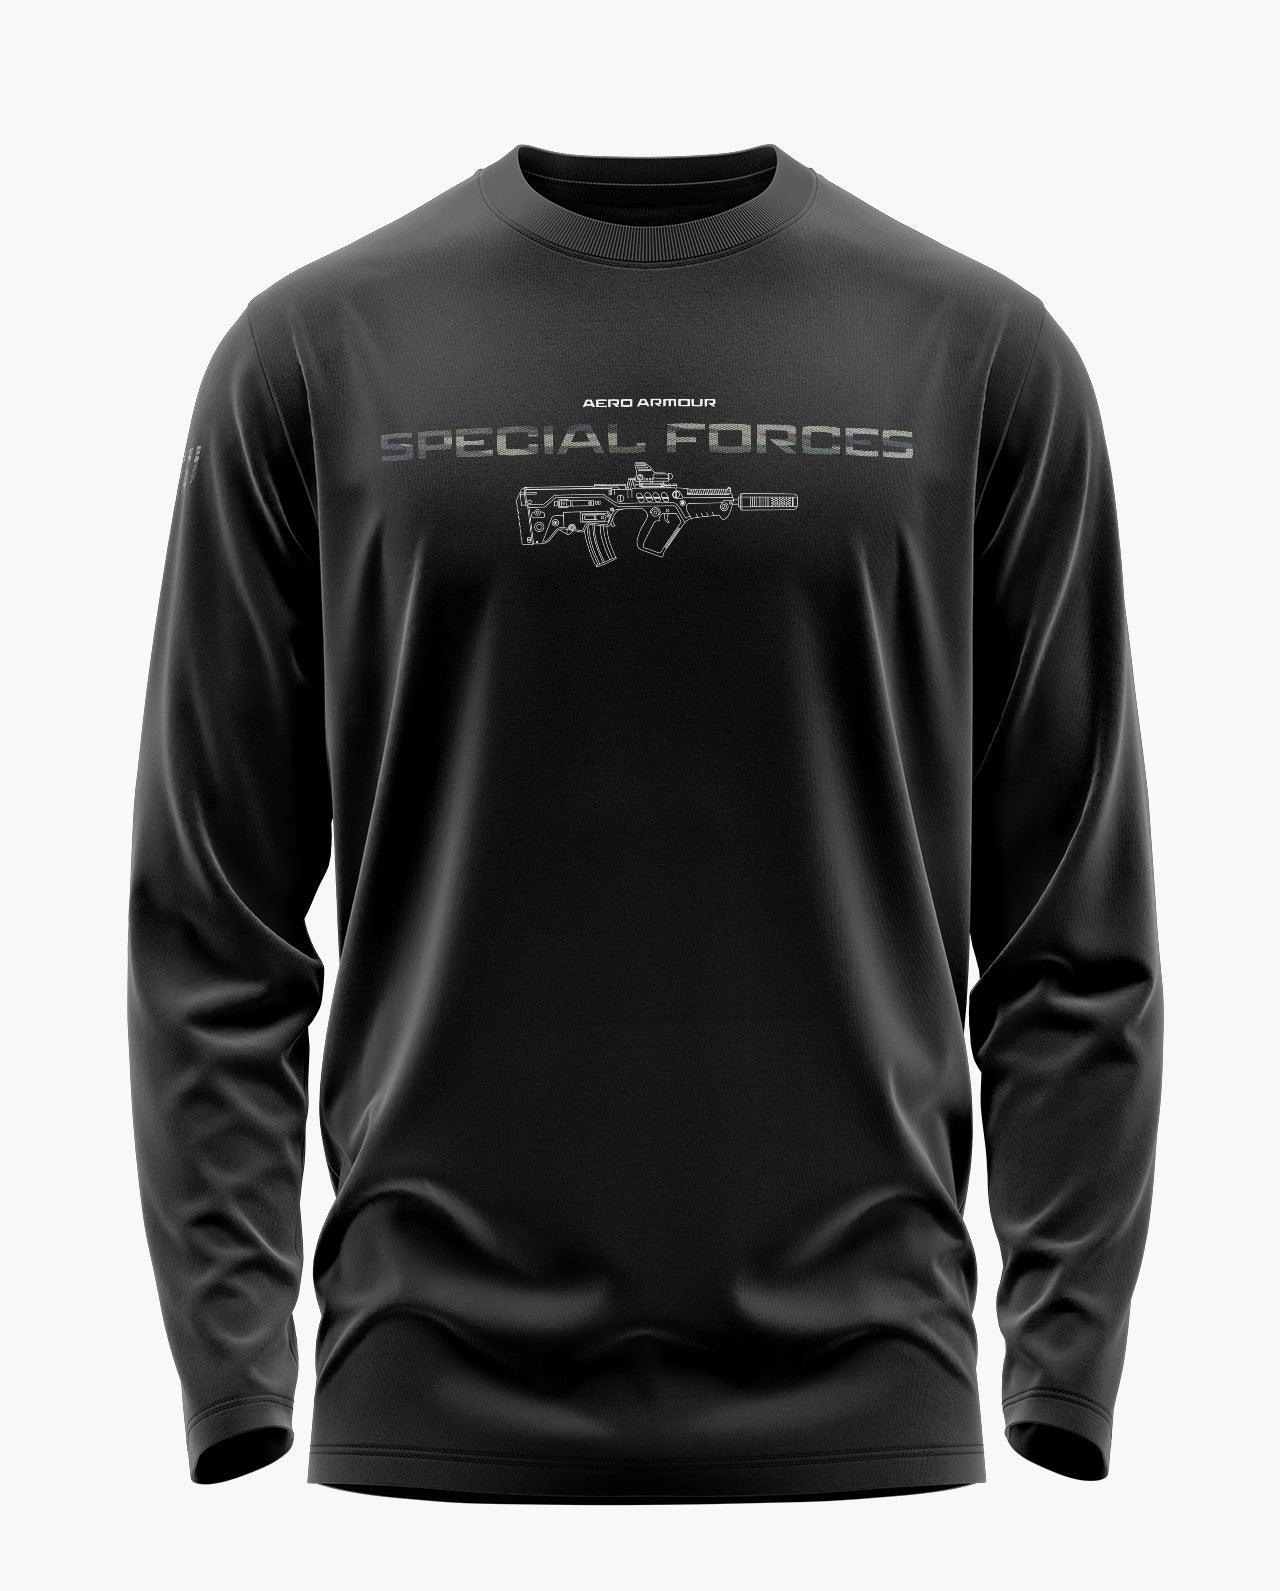 Special Forces Full Sleeve T-Shirt - Aero Armour